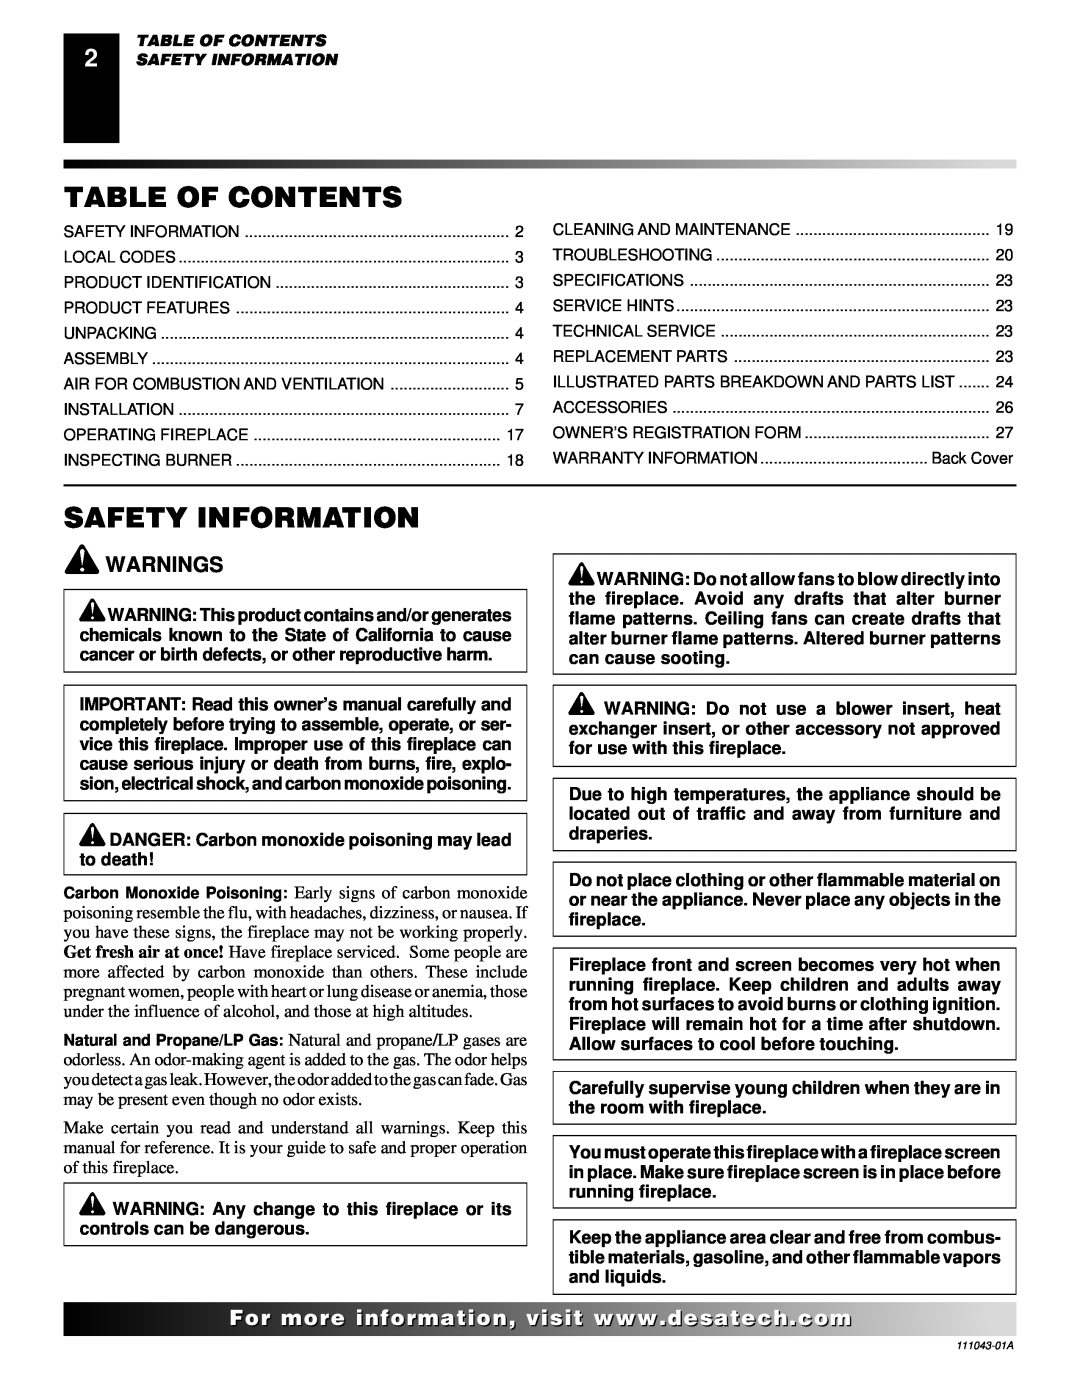 Vanguard Heating WMH26TNB installation manual Table Of Contents, Safety Information, Warnings 